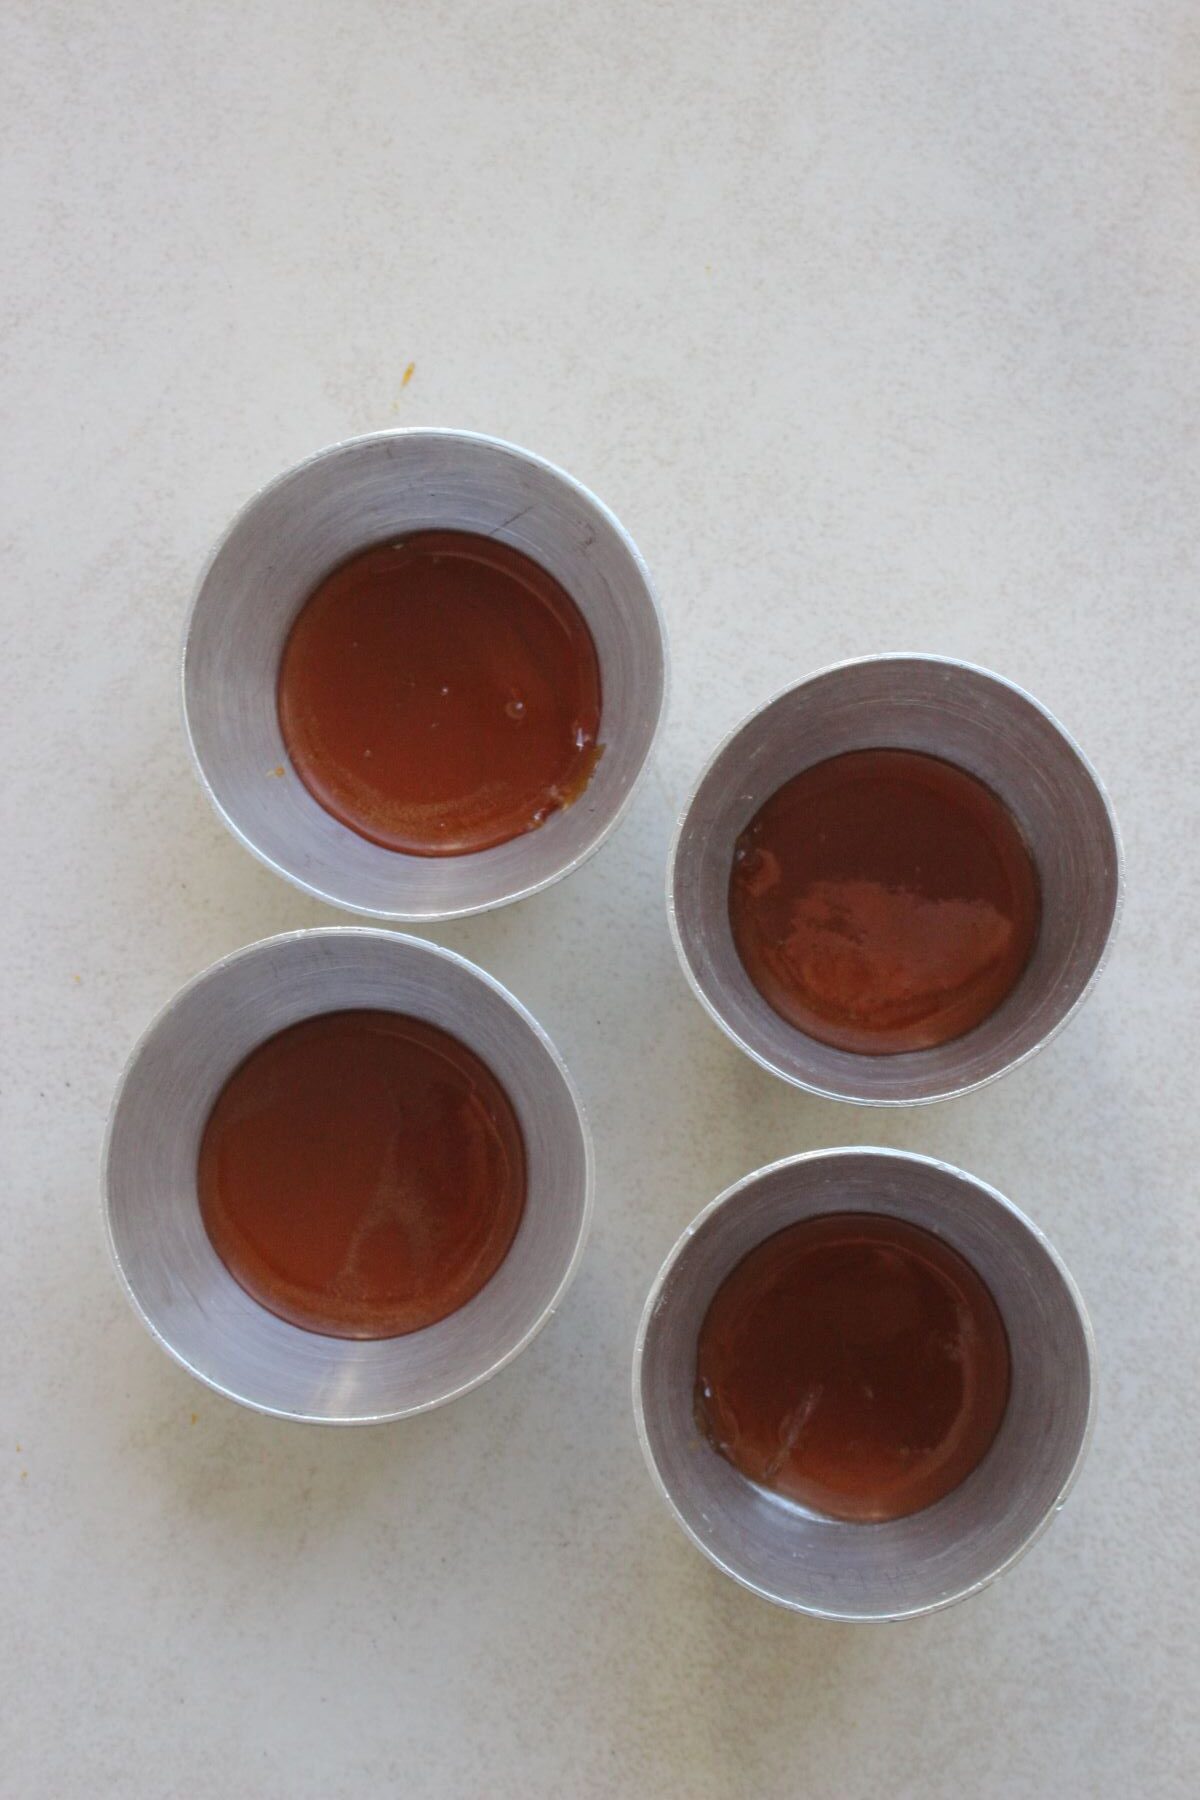 Four flan molds with caramel on a white surface seen from above.